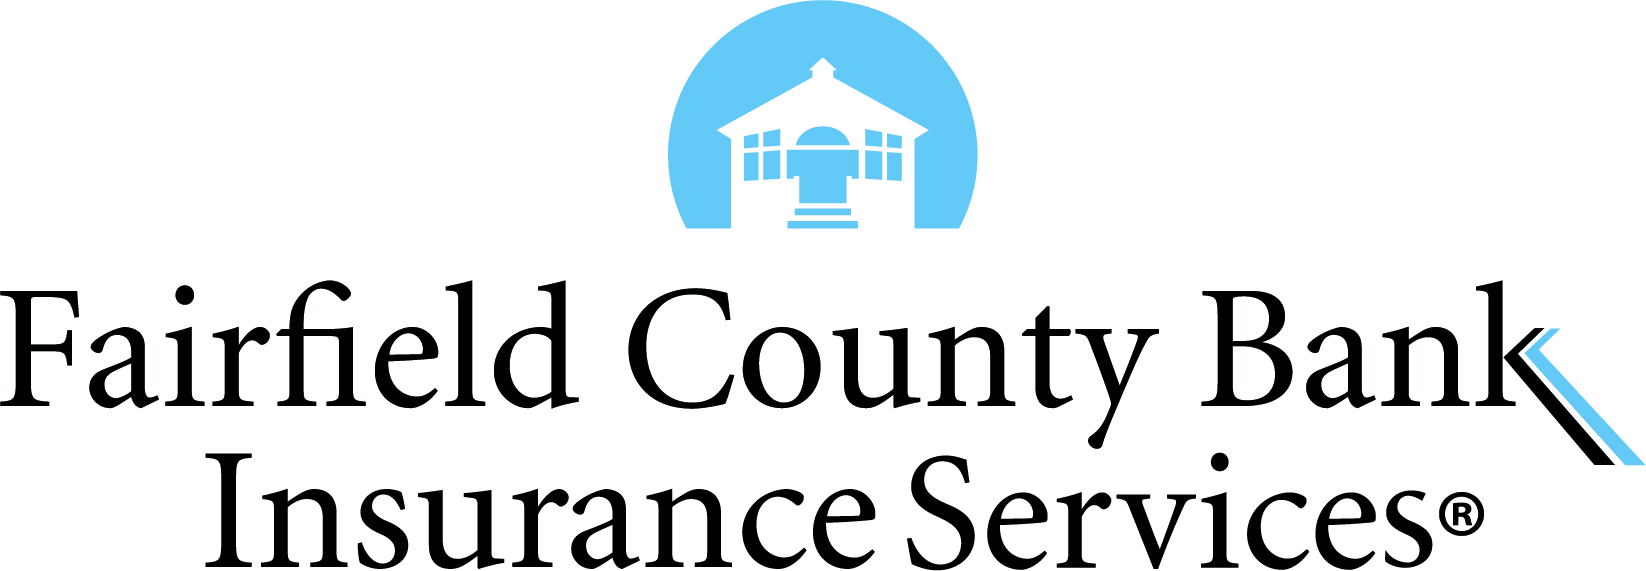 Fairfield County Bank Insurance Services